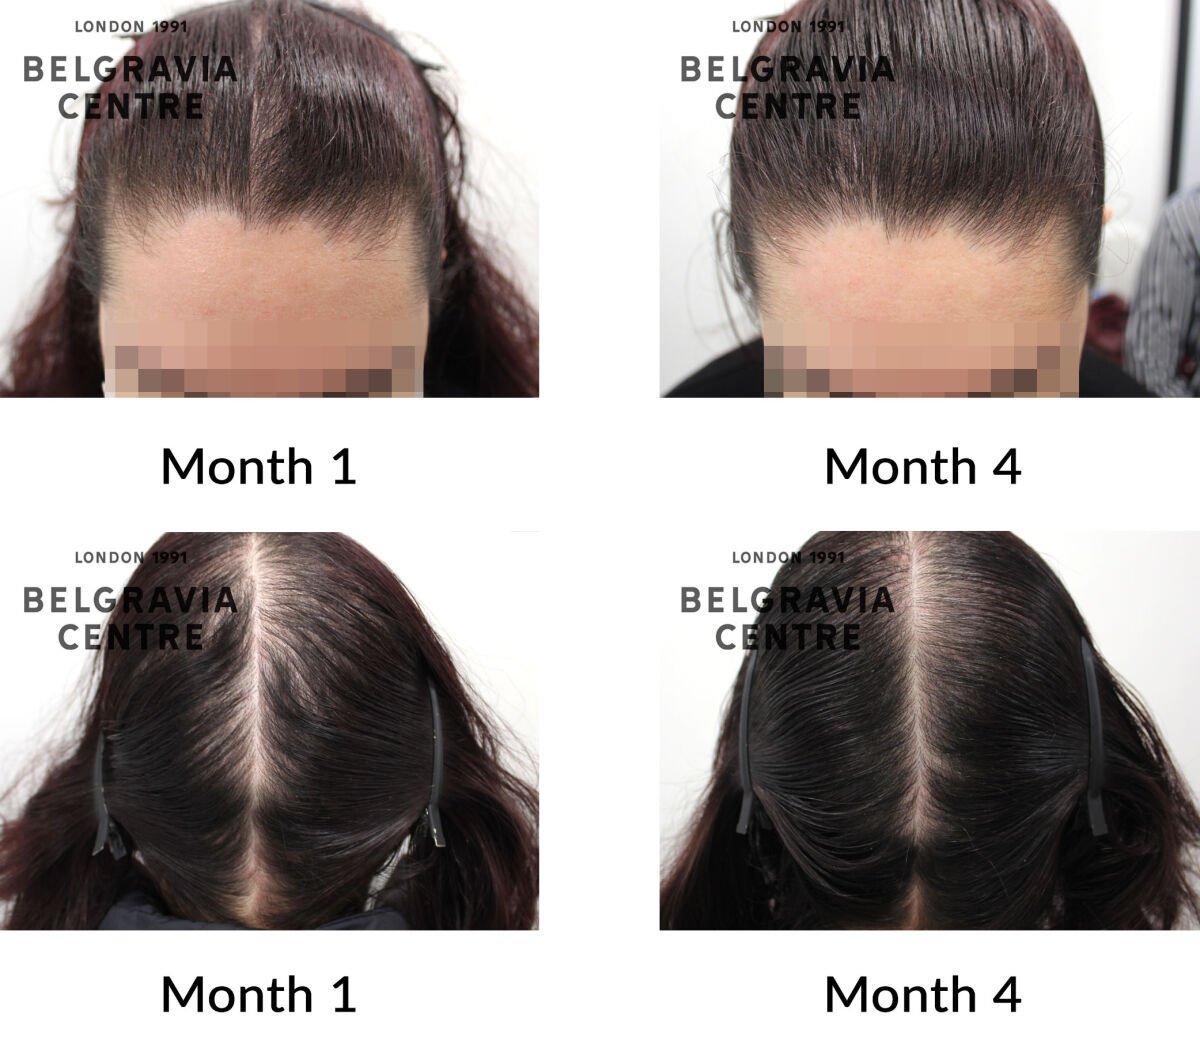 female pattern hair loss and diffuse hair loss the belgravia centre 433950